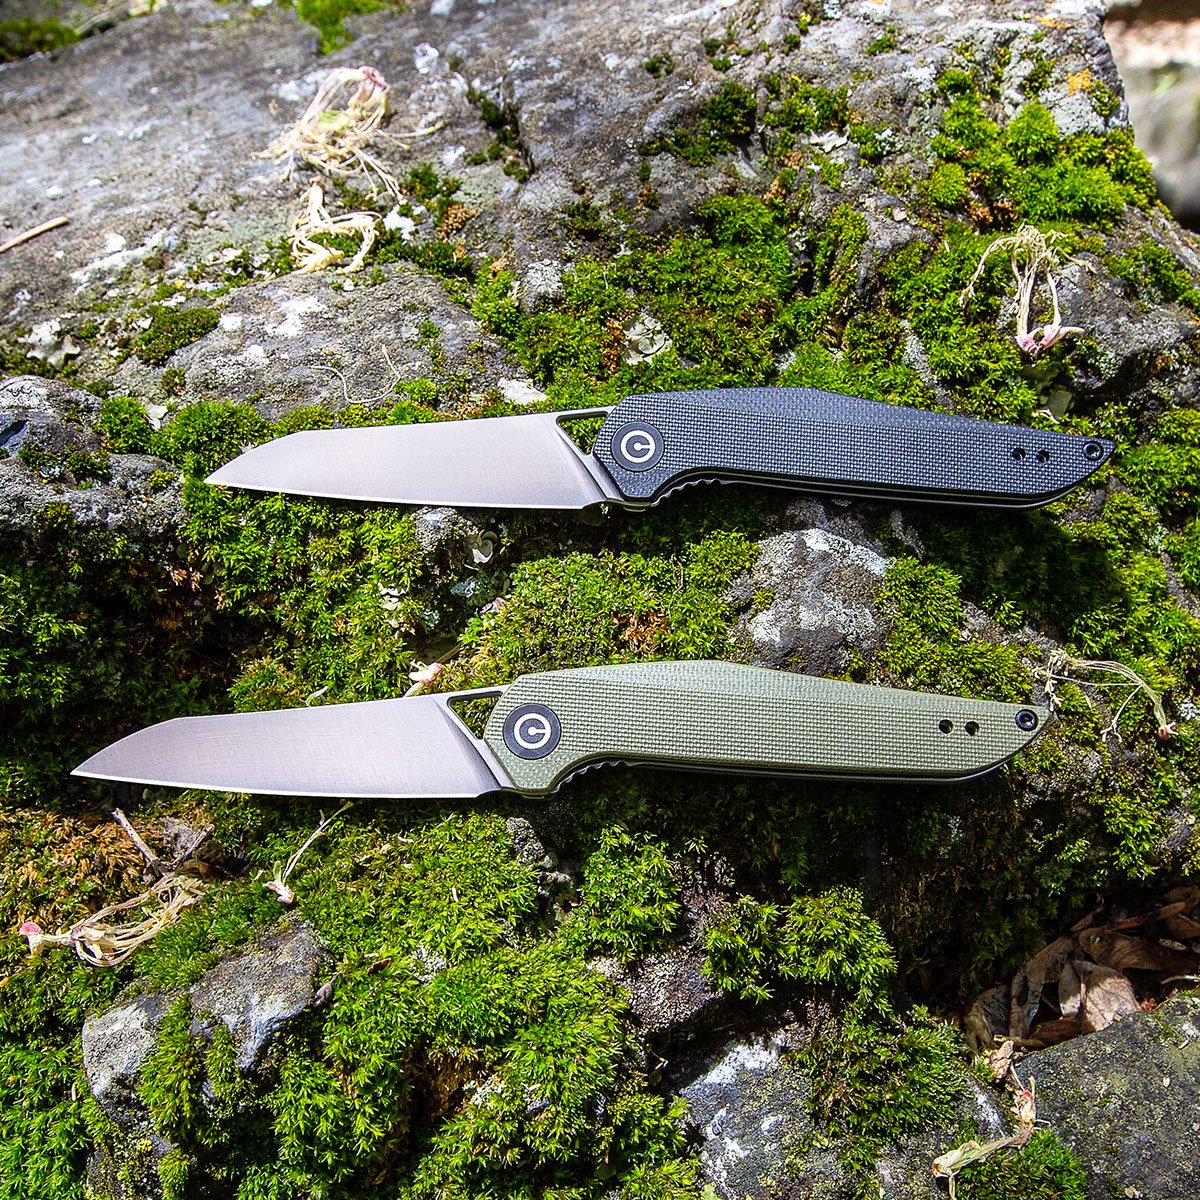 G-10, D2, and a unique design that's drool-worthy. Check out the Civivi Mckenna in black, green, and tan (not pictured).

bit.ly/2HLlD30

#bladehq #knifestagram #knifenuts #knifecommunity #knives #civivi